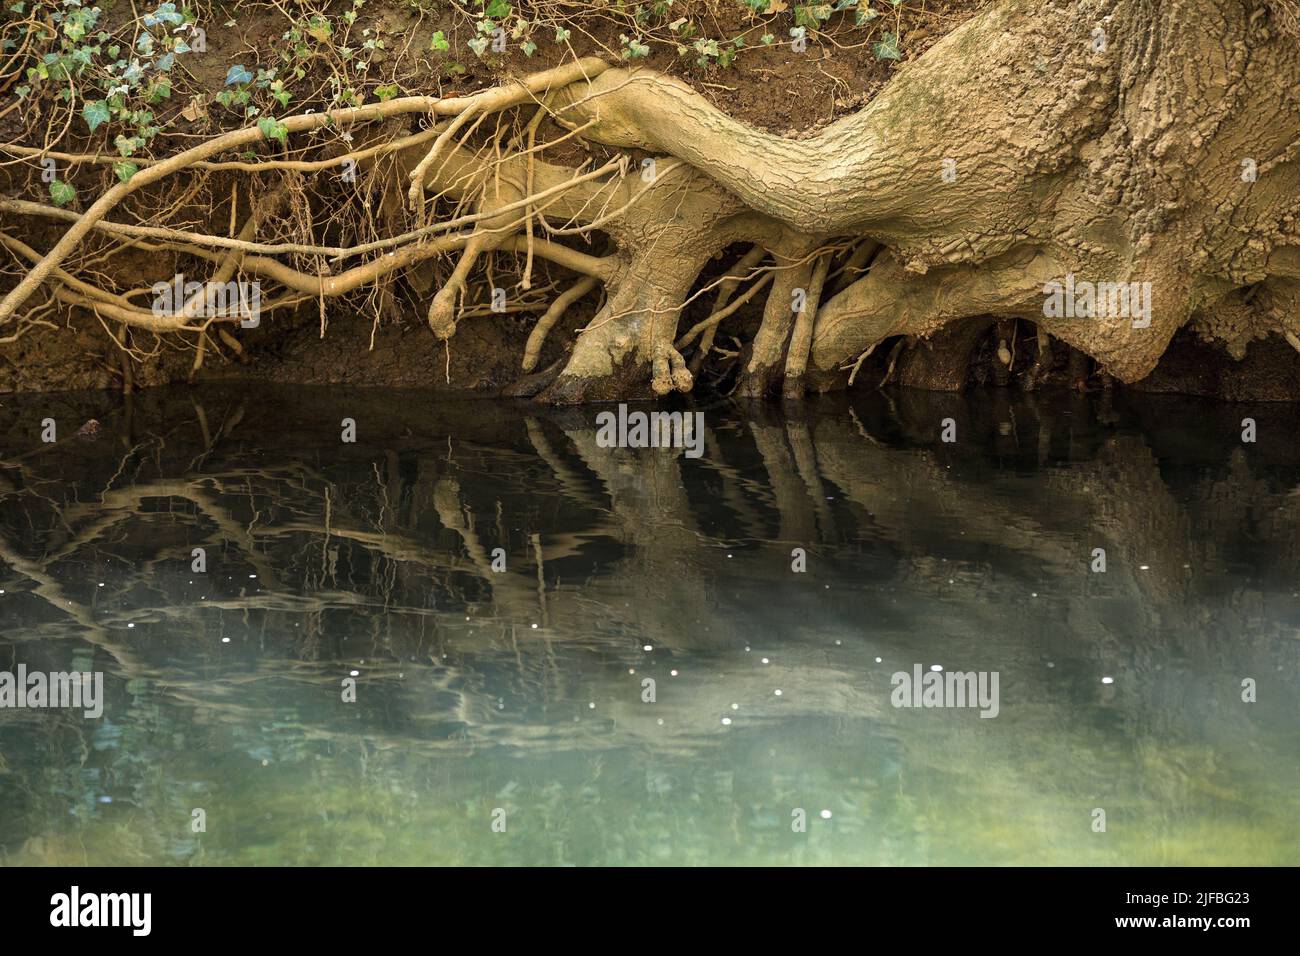 France, Var, Provence Verte, Bras, Le Cauron river tributary of the L'Argens river, reflections in the water Stock Photo